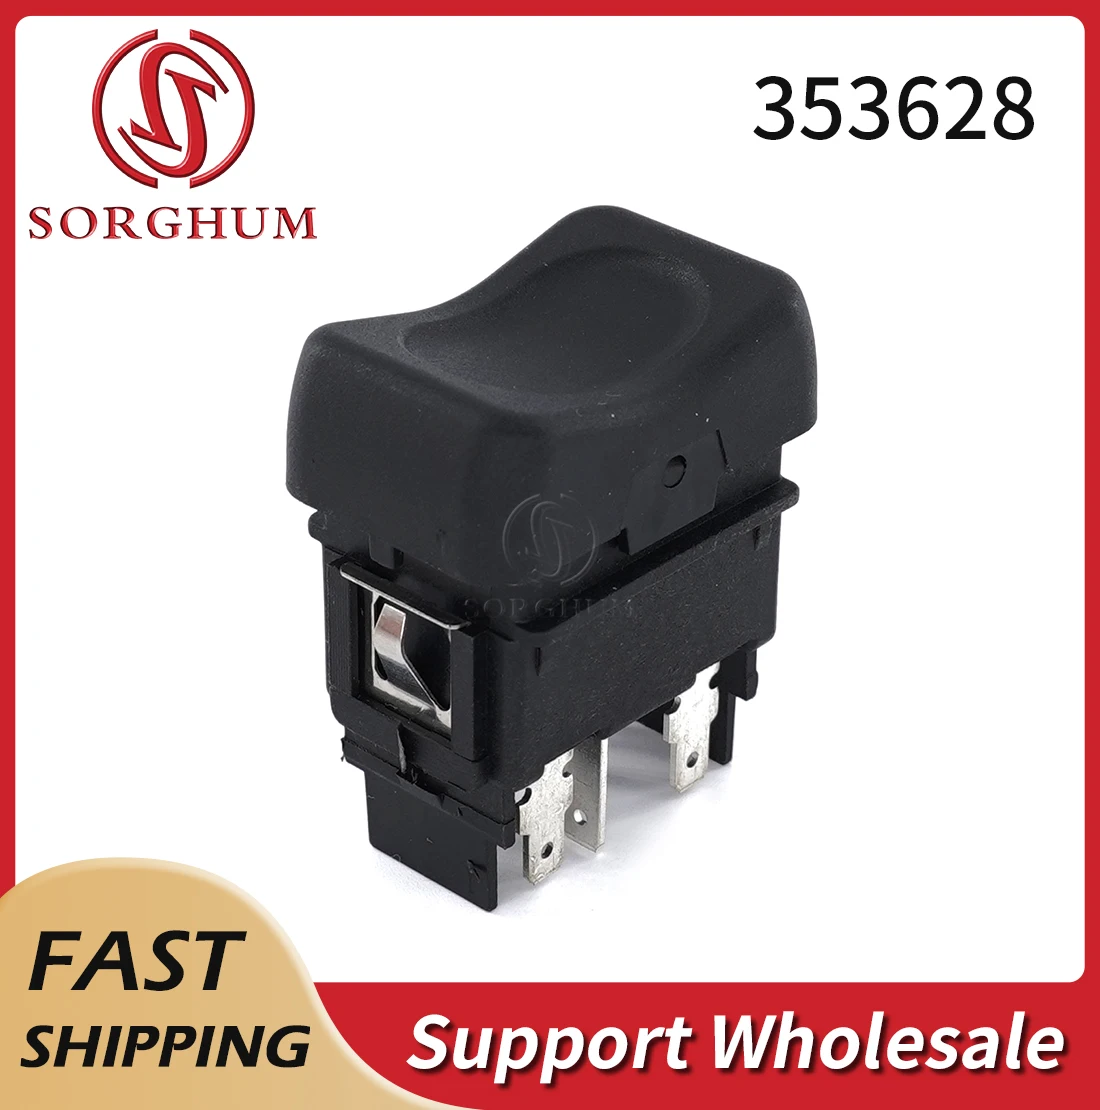 

Sorghum 353628 Passenger Side Single Button Lifter Electric Power Window Control Panel Switch For Scania 4 3 Series Truck 353625